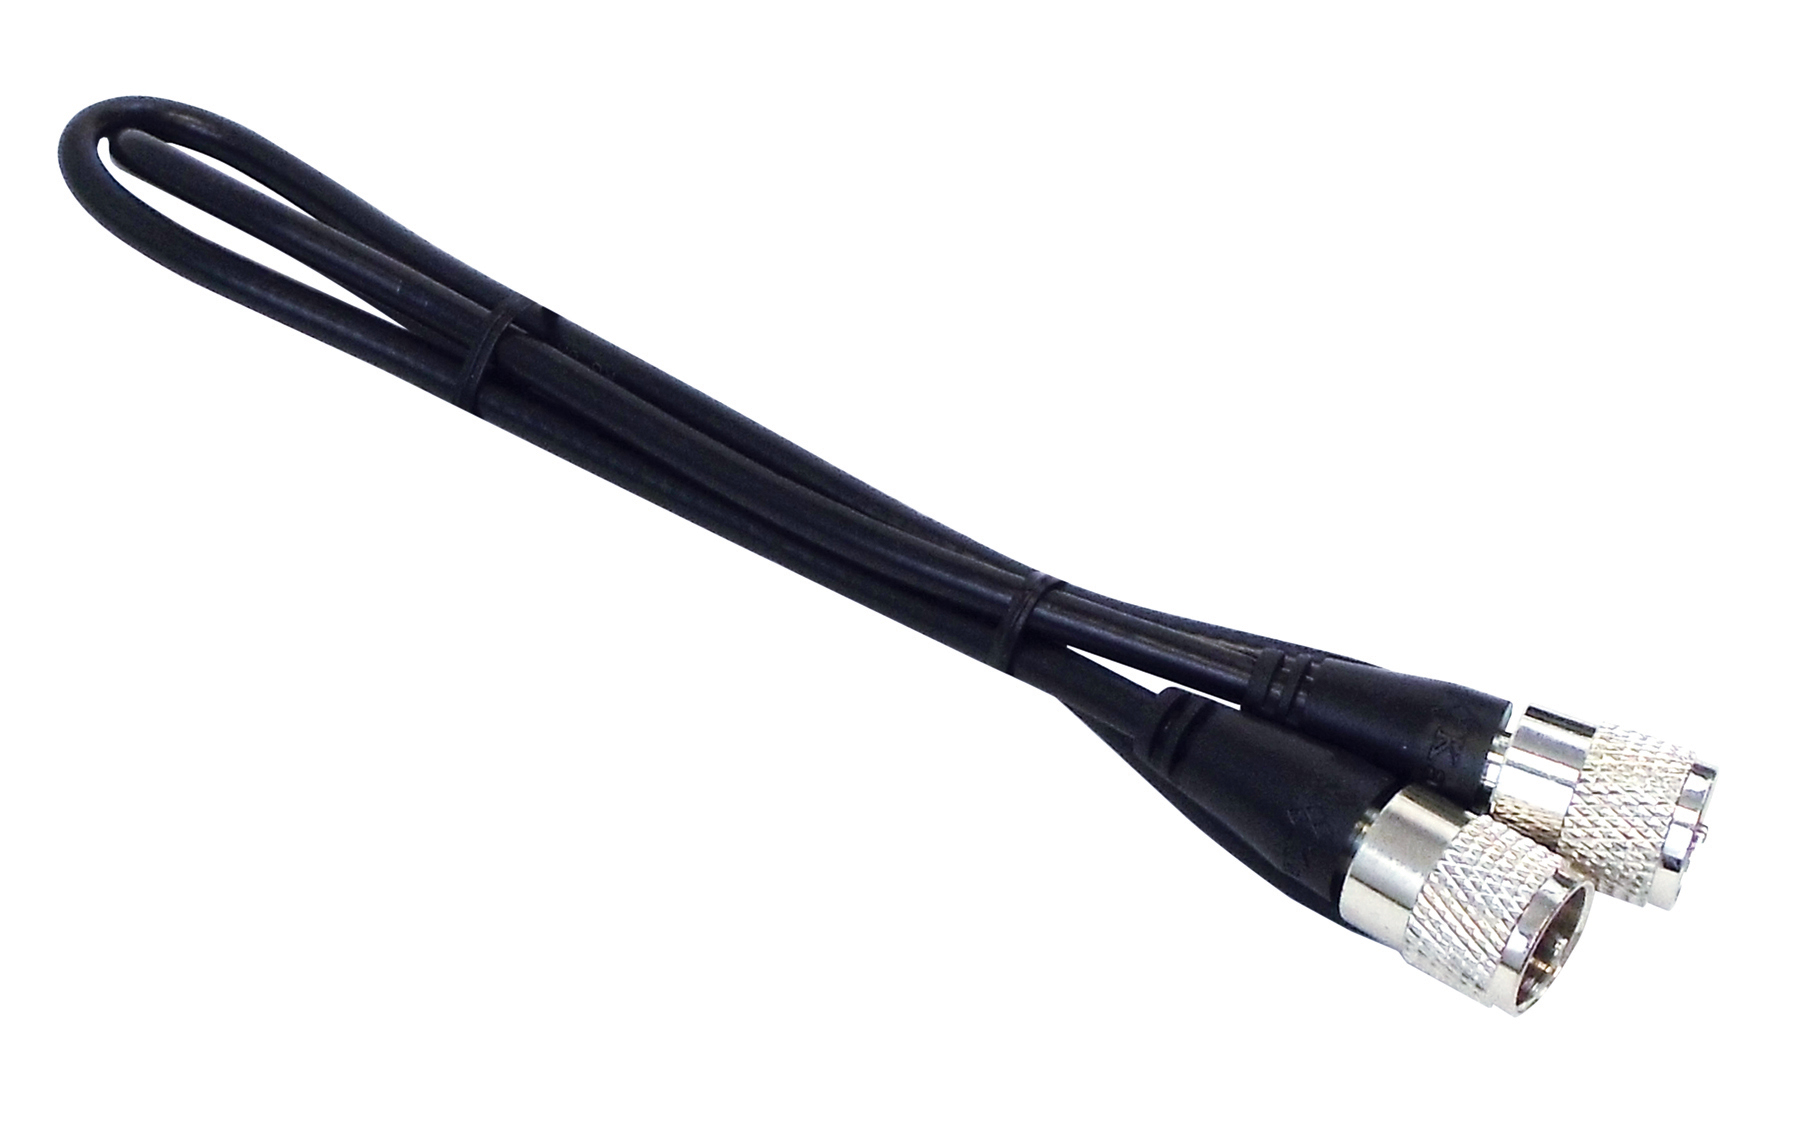 Kalibur 1.0 Foot Black Rg8X Coax Cable Assembly With Molded Pl259 Connectors On Each End